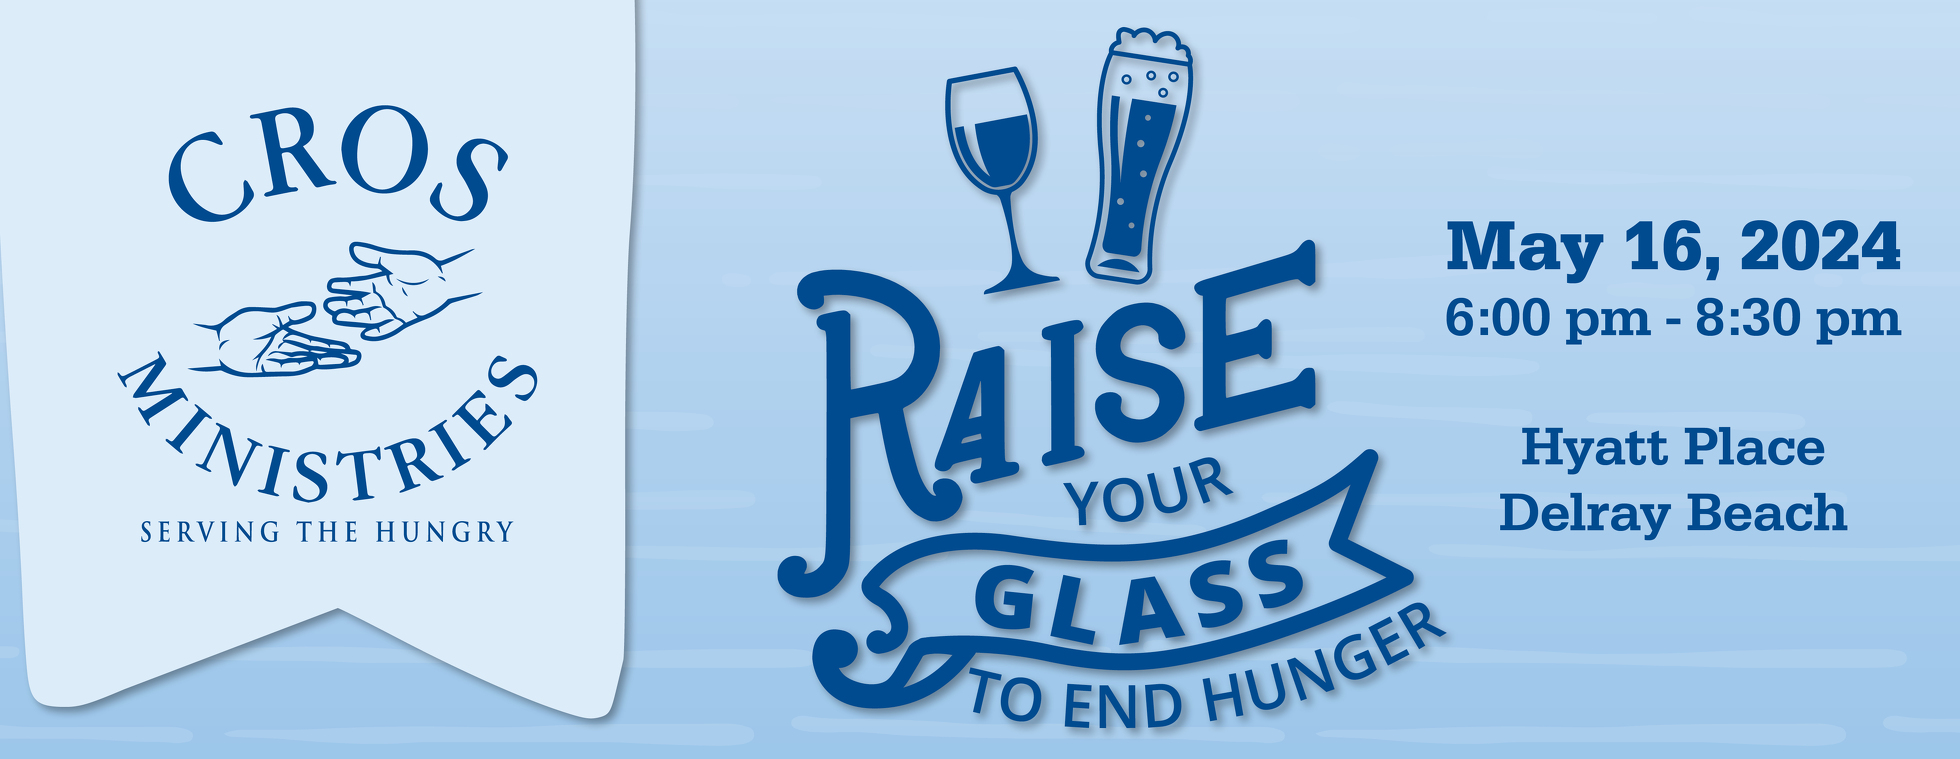 2024 Raise Your Glass to End Hunger